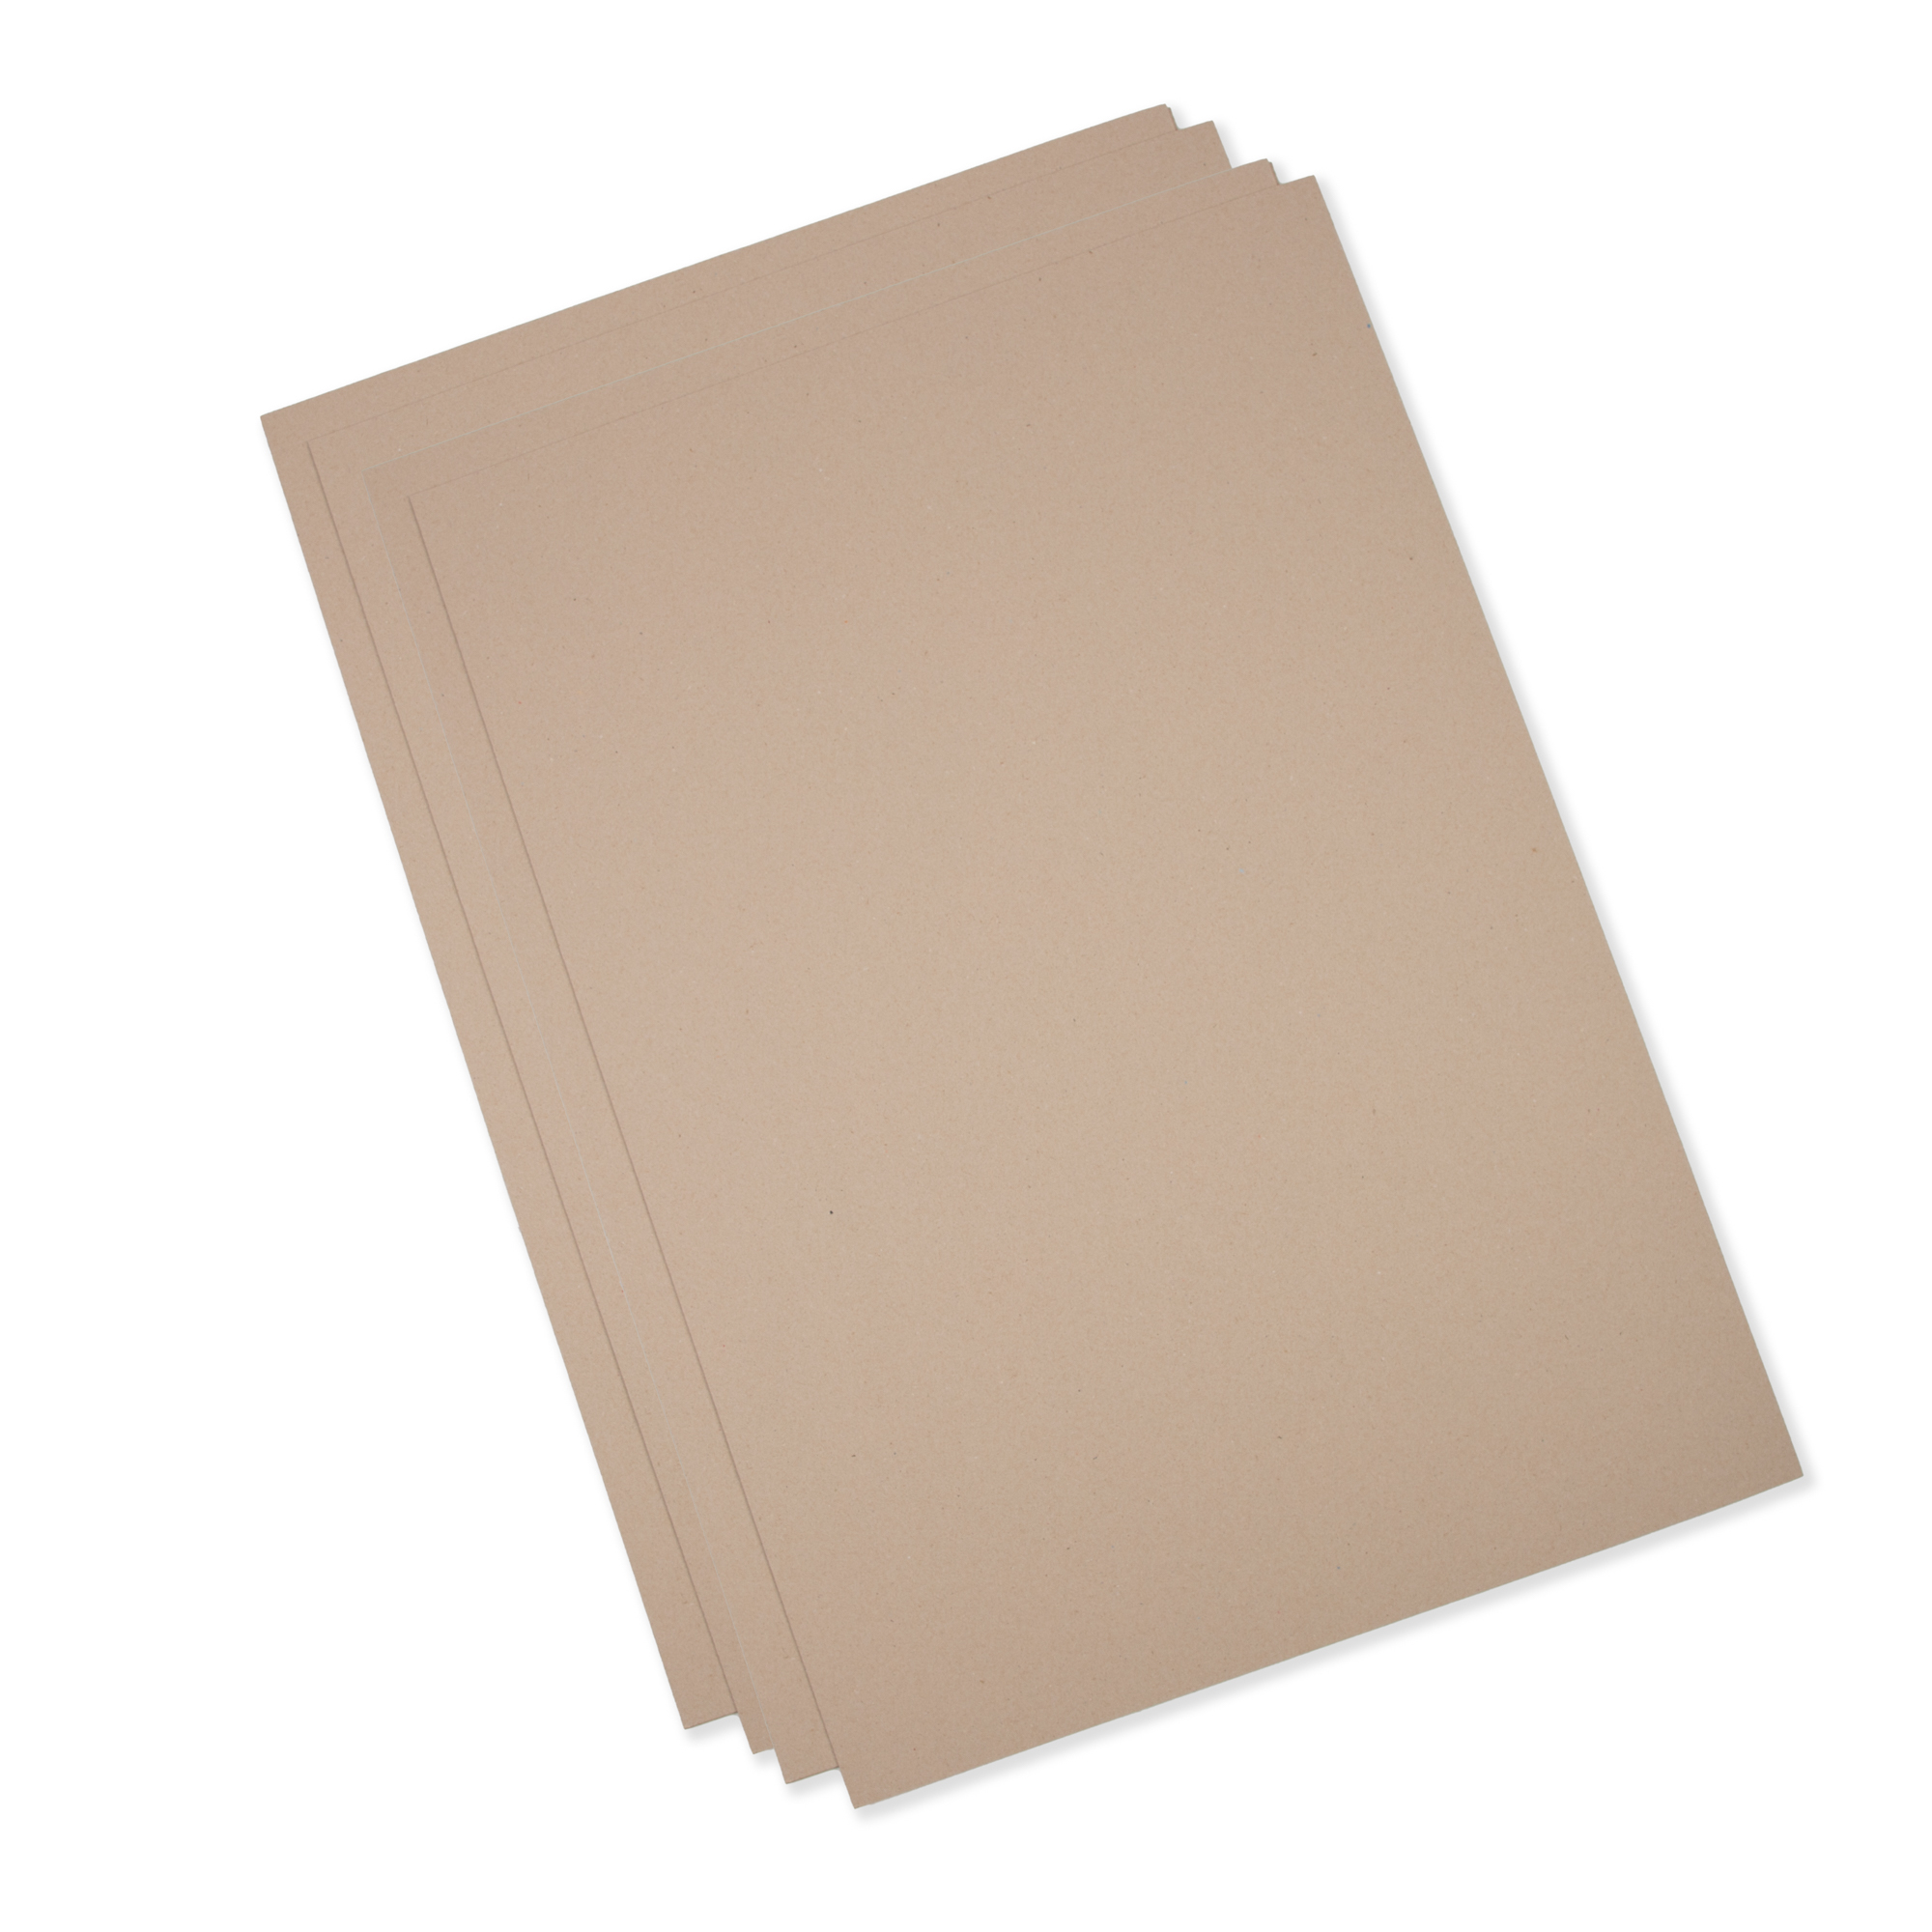 A1 Chipboard Thick PK10